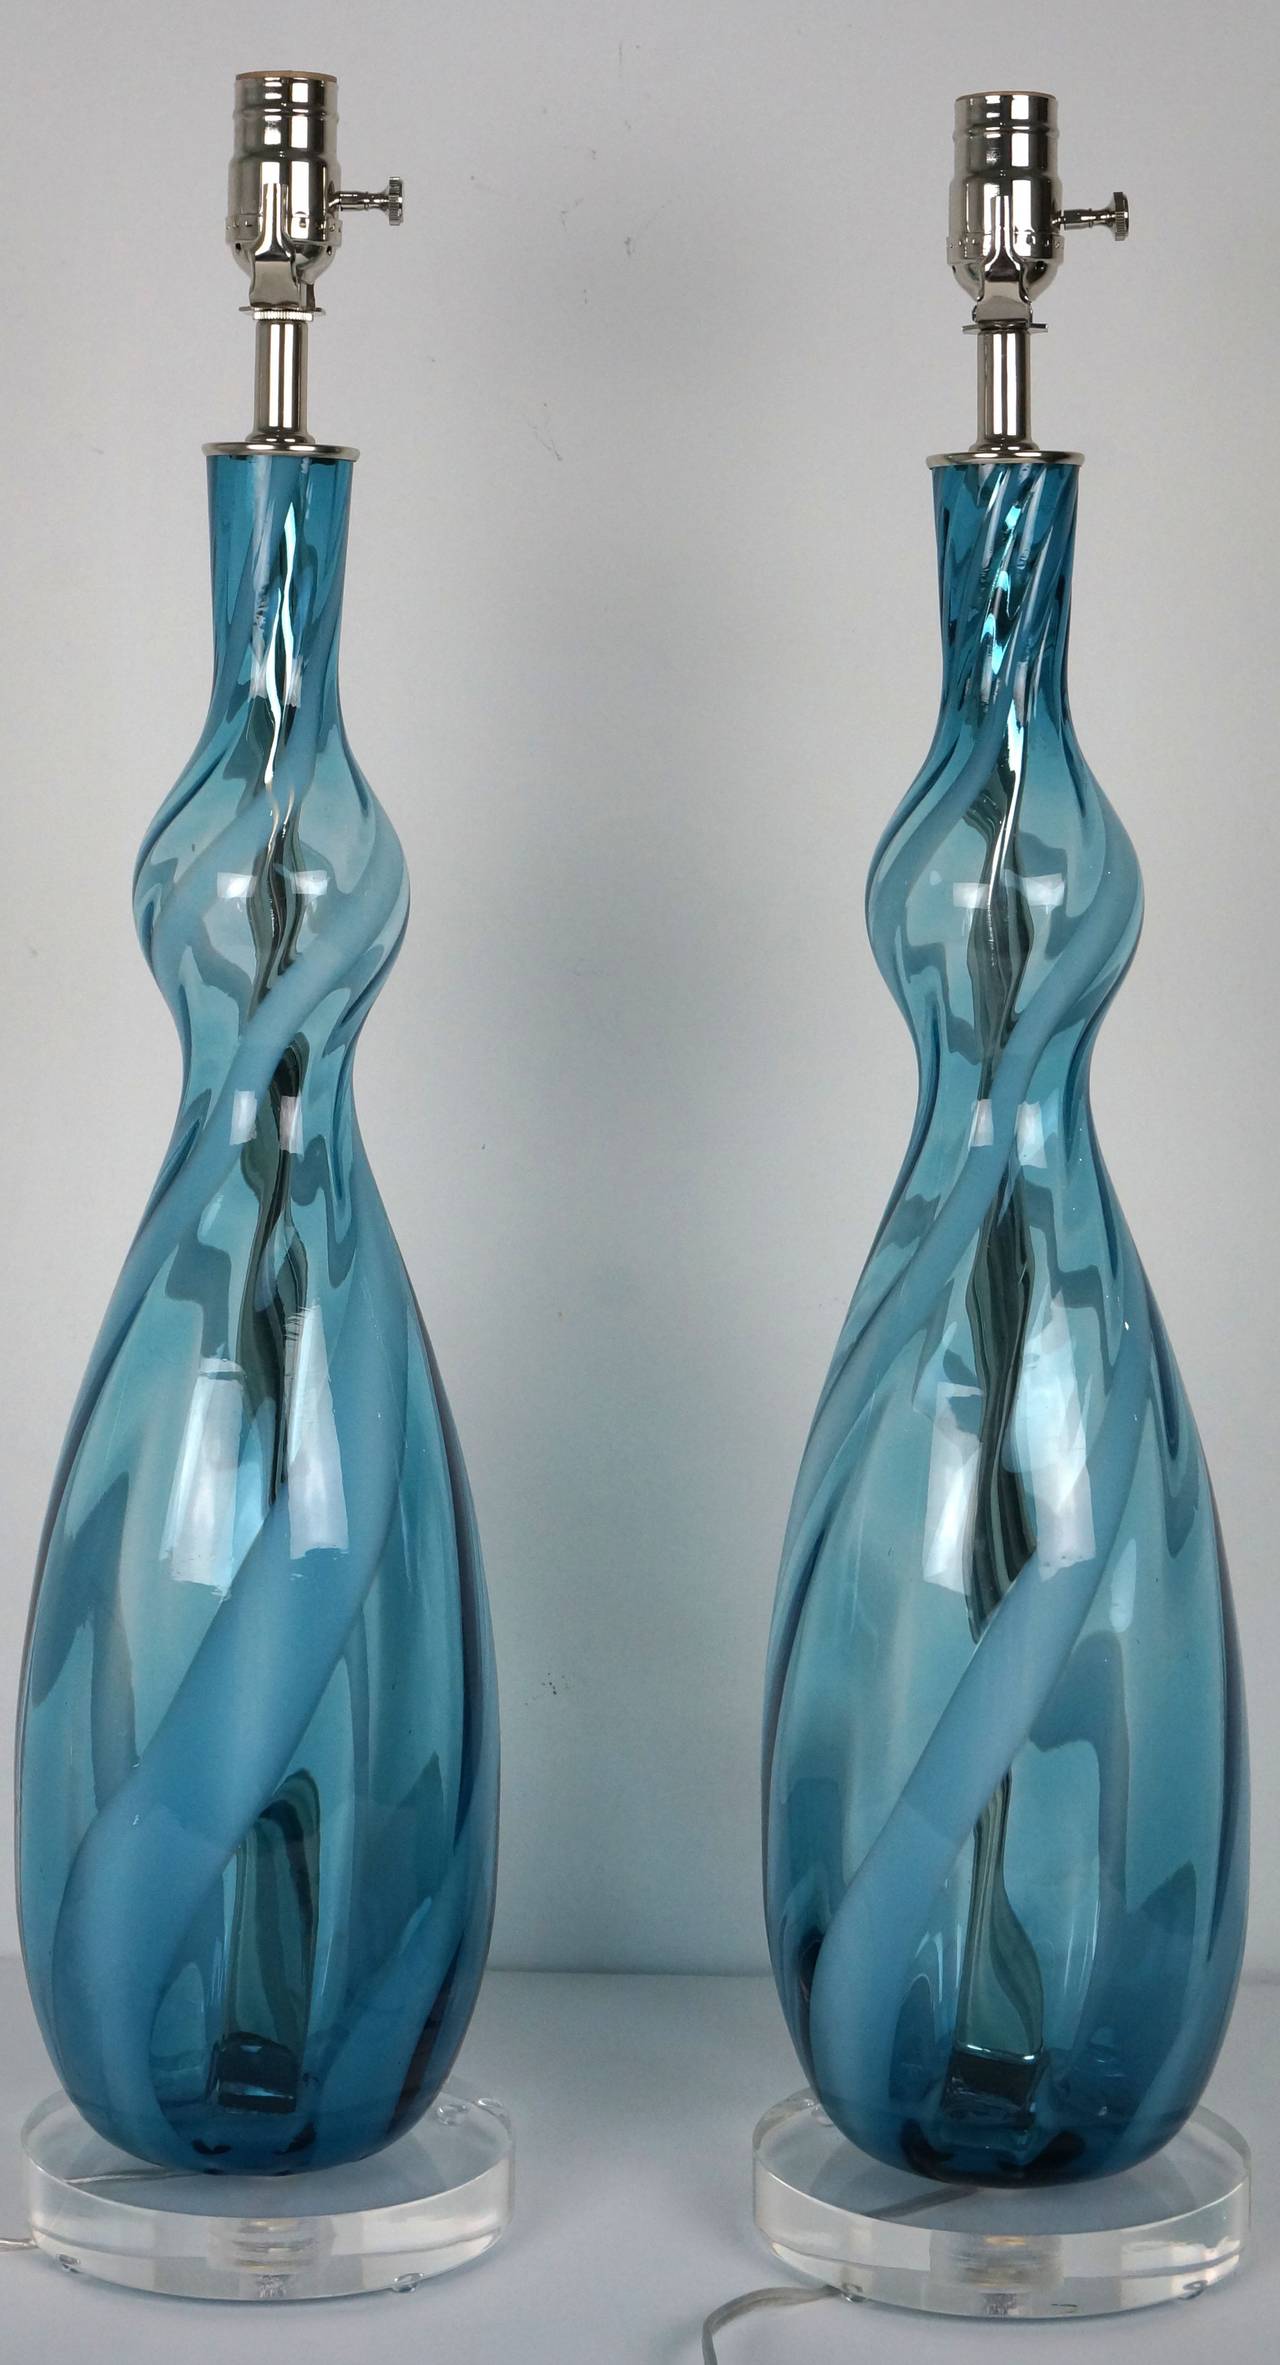 This beautiful pair of Murano glass lamps were created in the 1960s.

The vase form with a bulbous neck detail and swirling ribbons in colors of clear, peacock-blue and white make for a very light and airy composition. 

These lamps have been